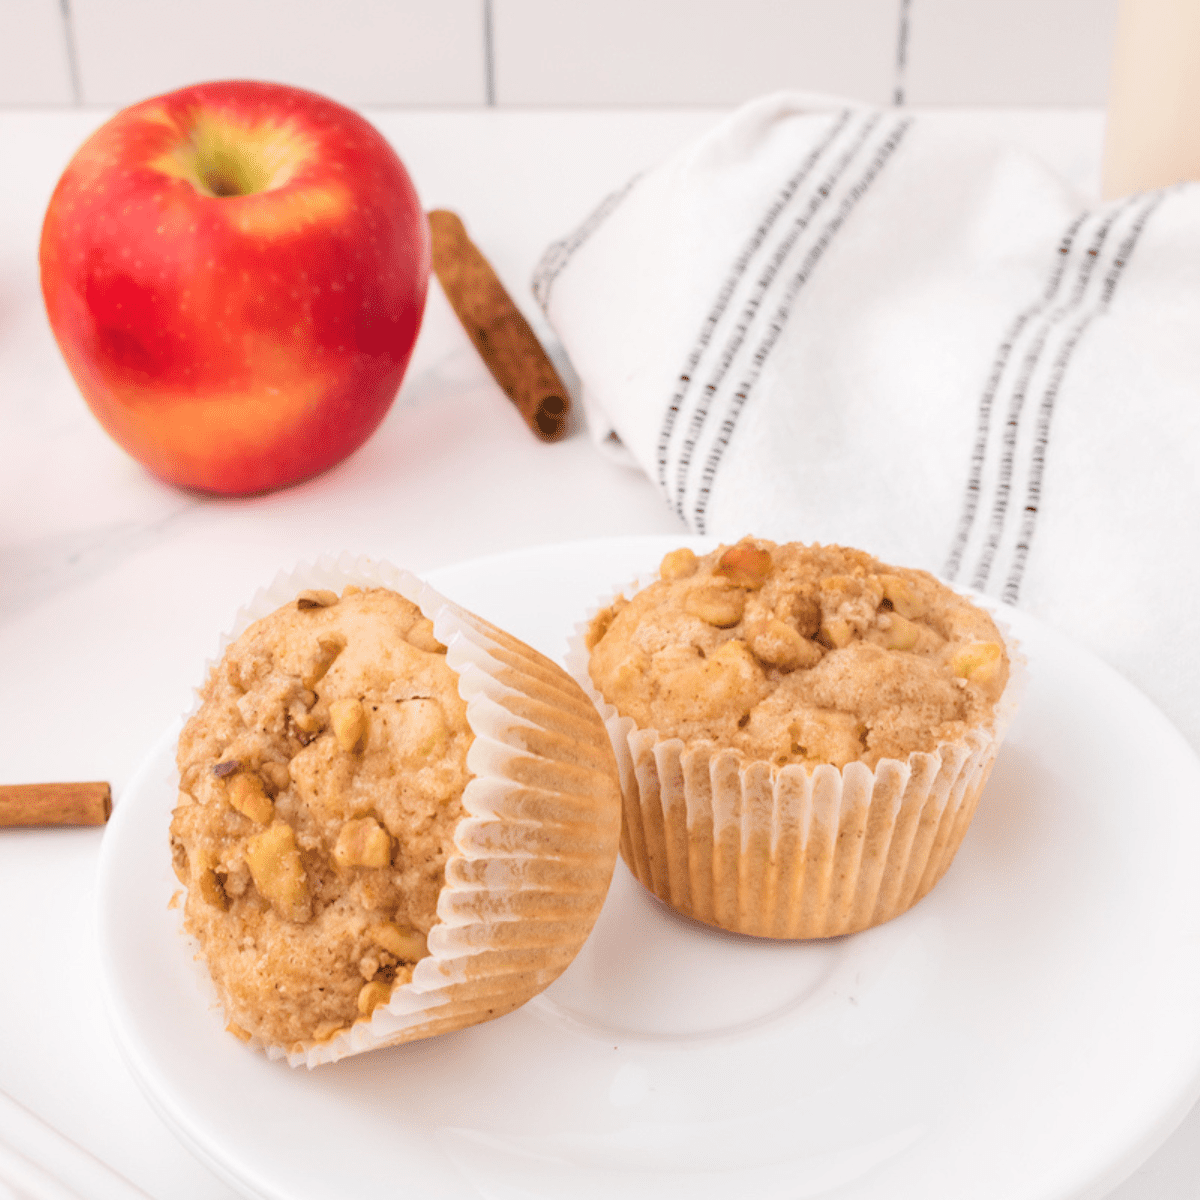 two apple crumble muffins on a white plate.